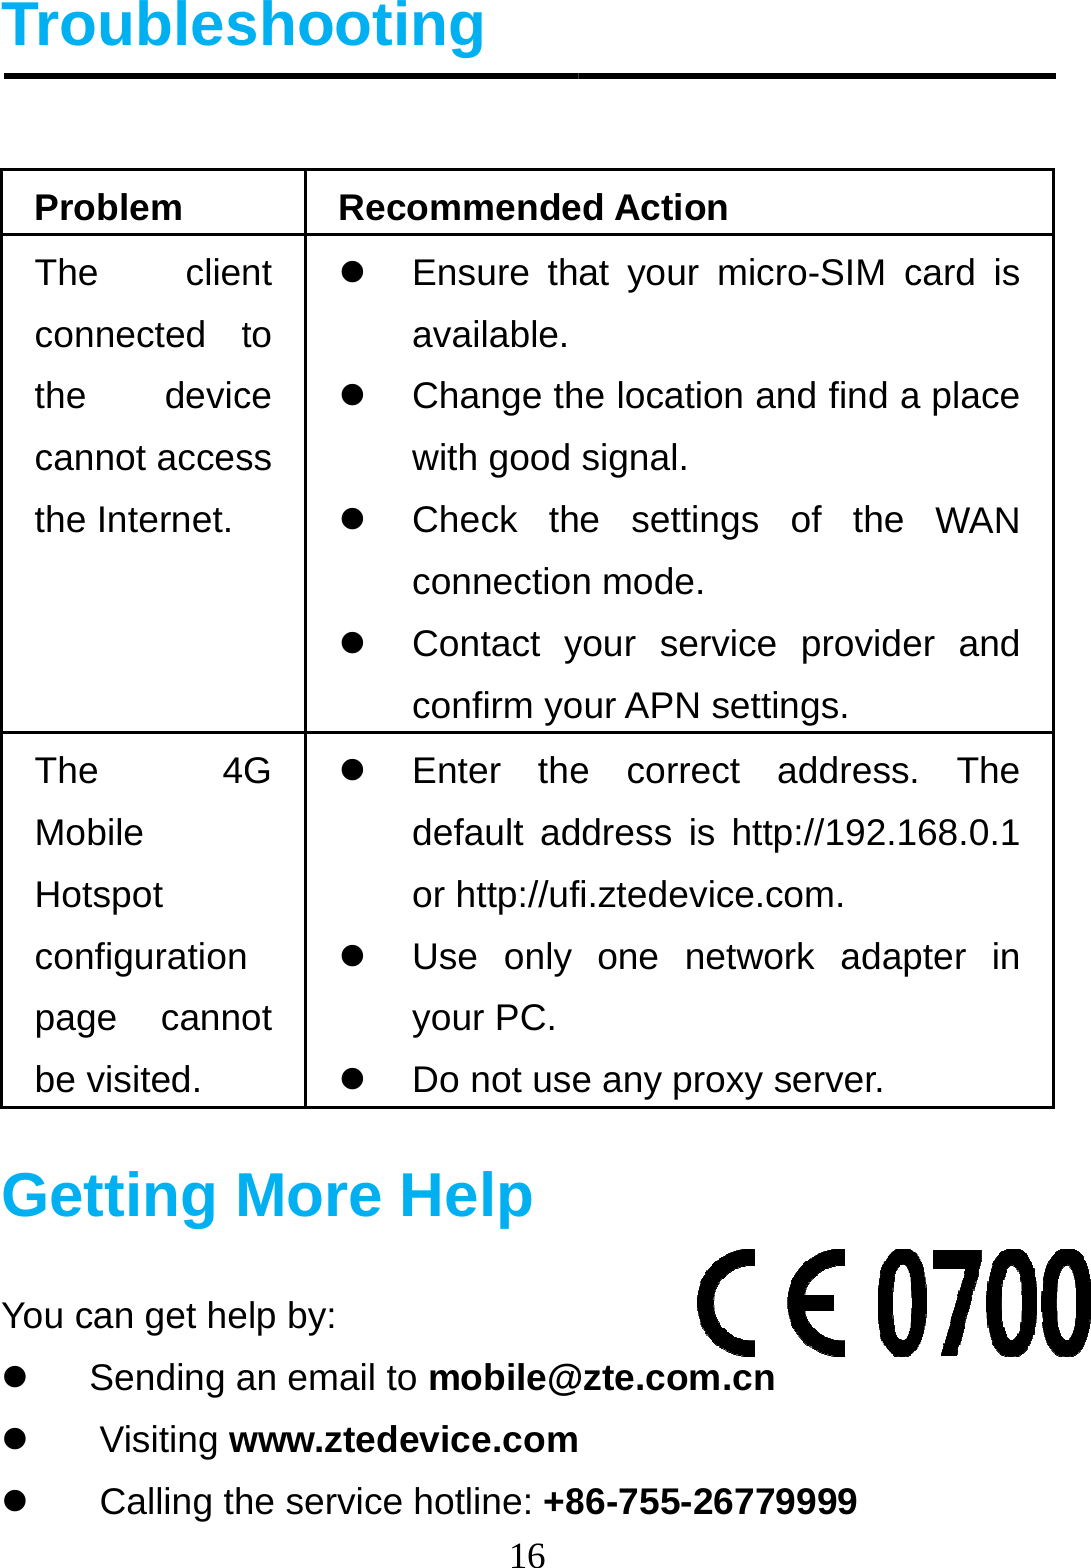  Troubles Problem The clienconnected tthe deviccannot accesthe Internet. The 4GMobile Hotspot configurationpage cannobe visited. Getting MYou can get he Sending a  Visiting w   Calling th16shooting Recommendent to ce ss  Ensure thavailable. Change thwith good  Check thconnection Contact yconfirm yoG  ot  Enter thedefault ador http://uf Use only your PC. Do not useMore Helpelp by: an email to mobile@www.ztedevice.comhe service hotline: +8ed Action at your micro-SIM che location and find asignal. e settings of the n mode. your service provideour APN settings. e correct addressddress is http://192.1fi.ztedevice.com. one network adape any proxy server. @zte.com.cn 86-755-26779999 card is a place WAN er and . The 68.0.1 pter in 